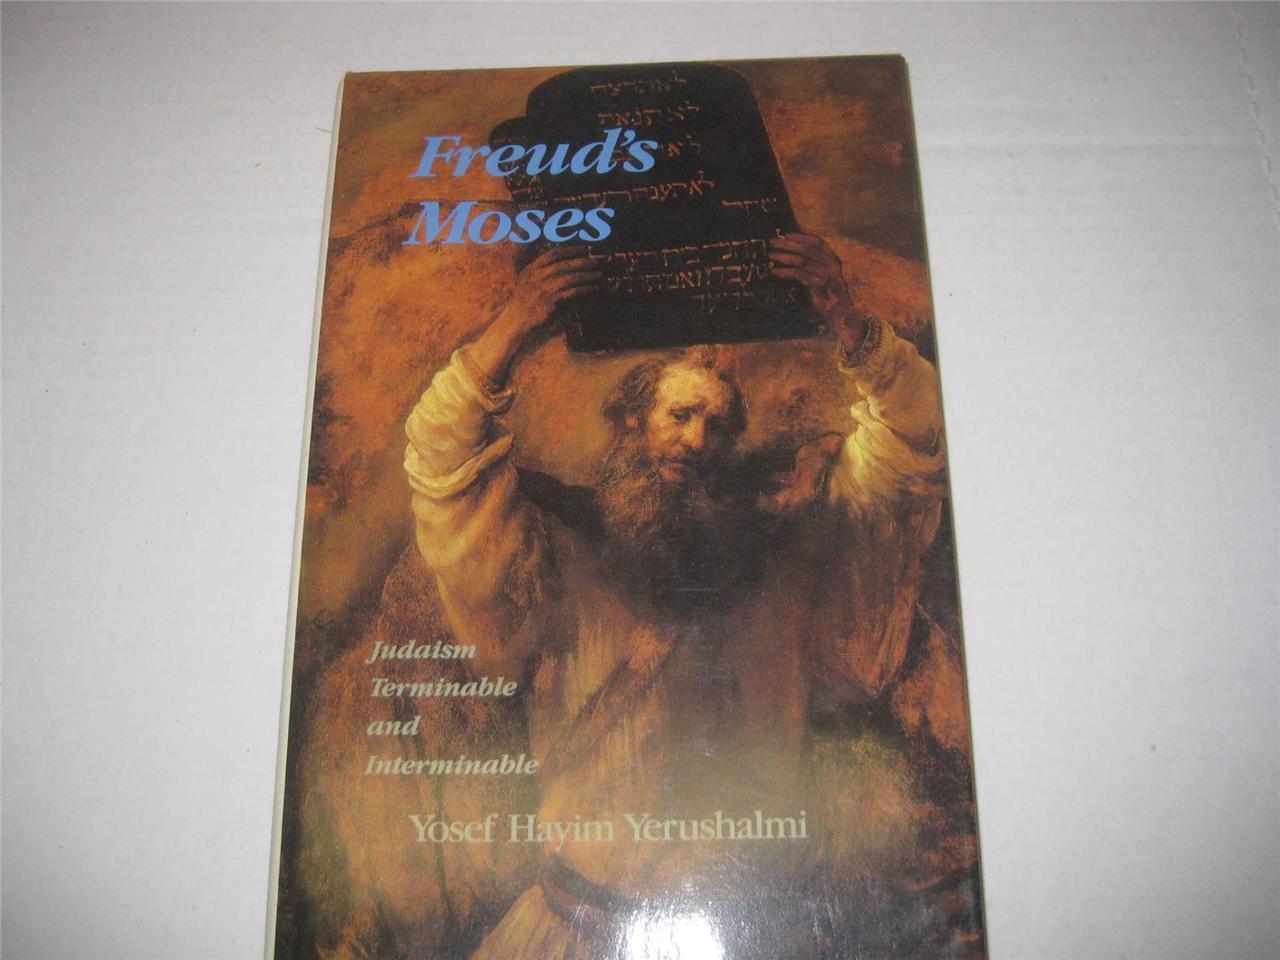 Freud\'s Moses: Judaism Terminable and Interminable by Yosef Hayim Yerushalmi